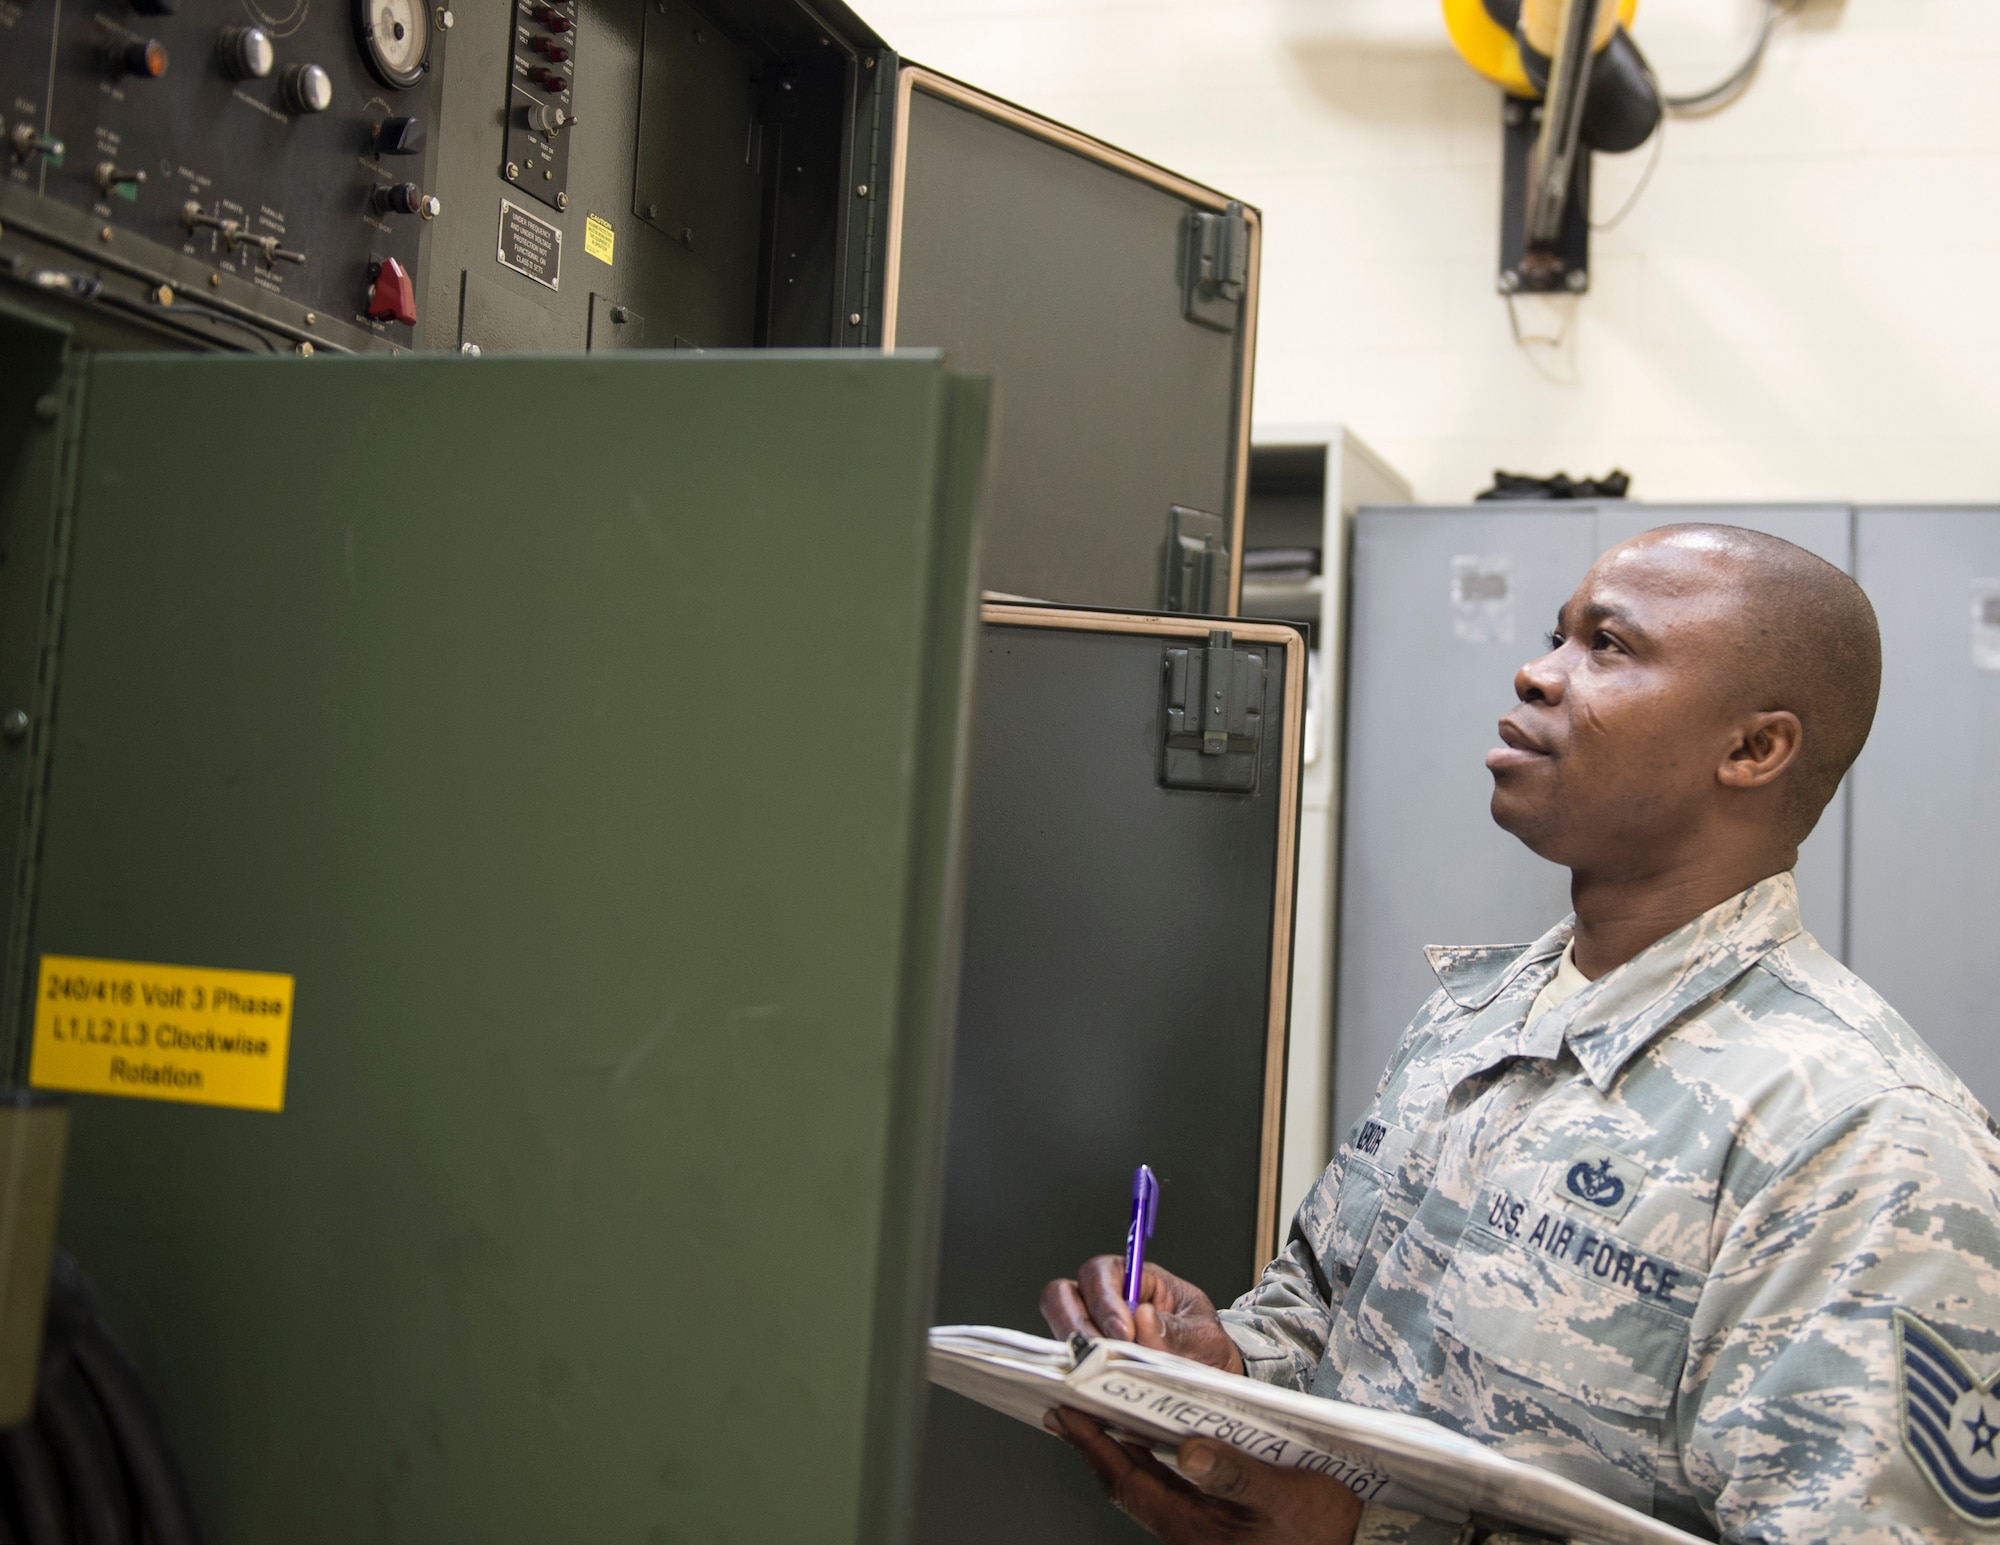 U.S. Air Force Tech. Sgt. Kokou Azalekor, an electrical power production technician with the 133rd Civil Engineer Squadron, records information onto a generator log in St. Paul, Minn., Feb. 12, 2020.